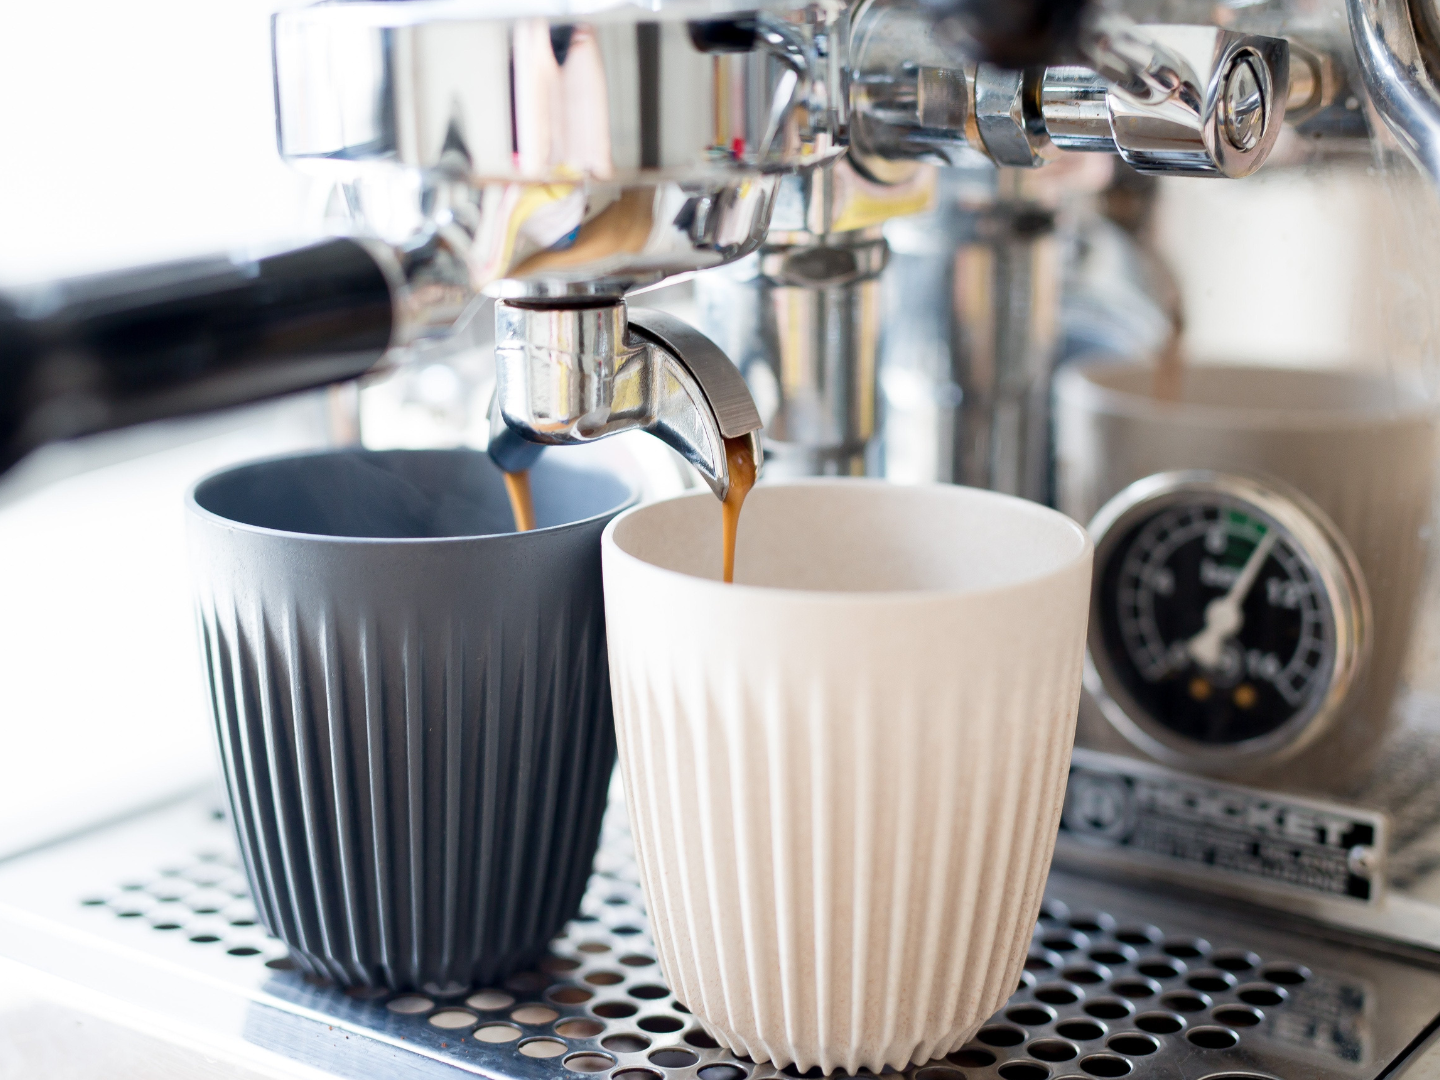 A set of two espresso cups by Huskee placed under a coffee machine that is pouring coffee into them.